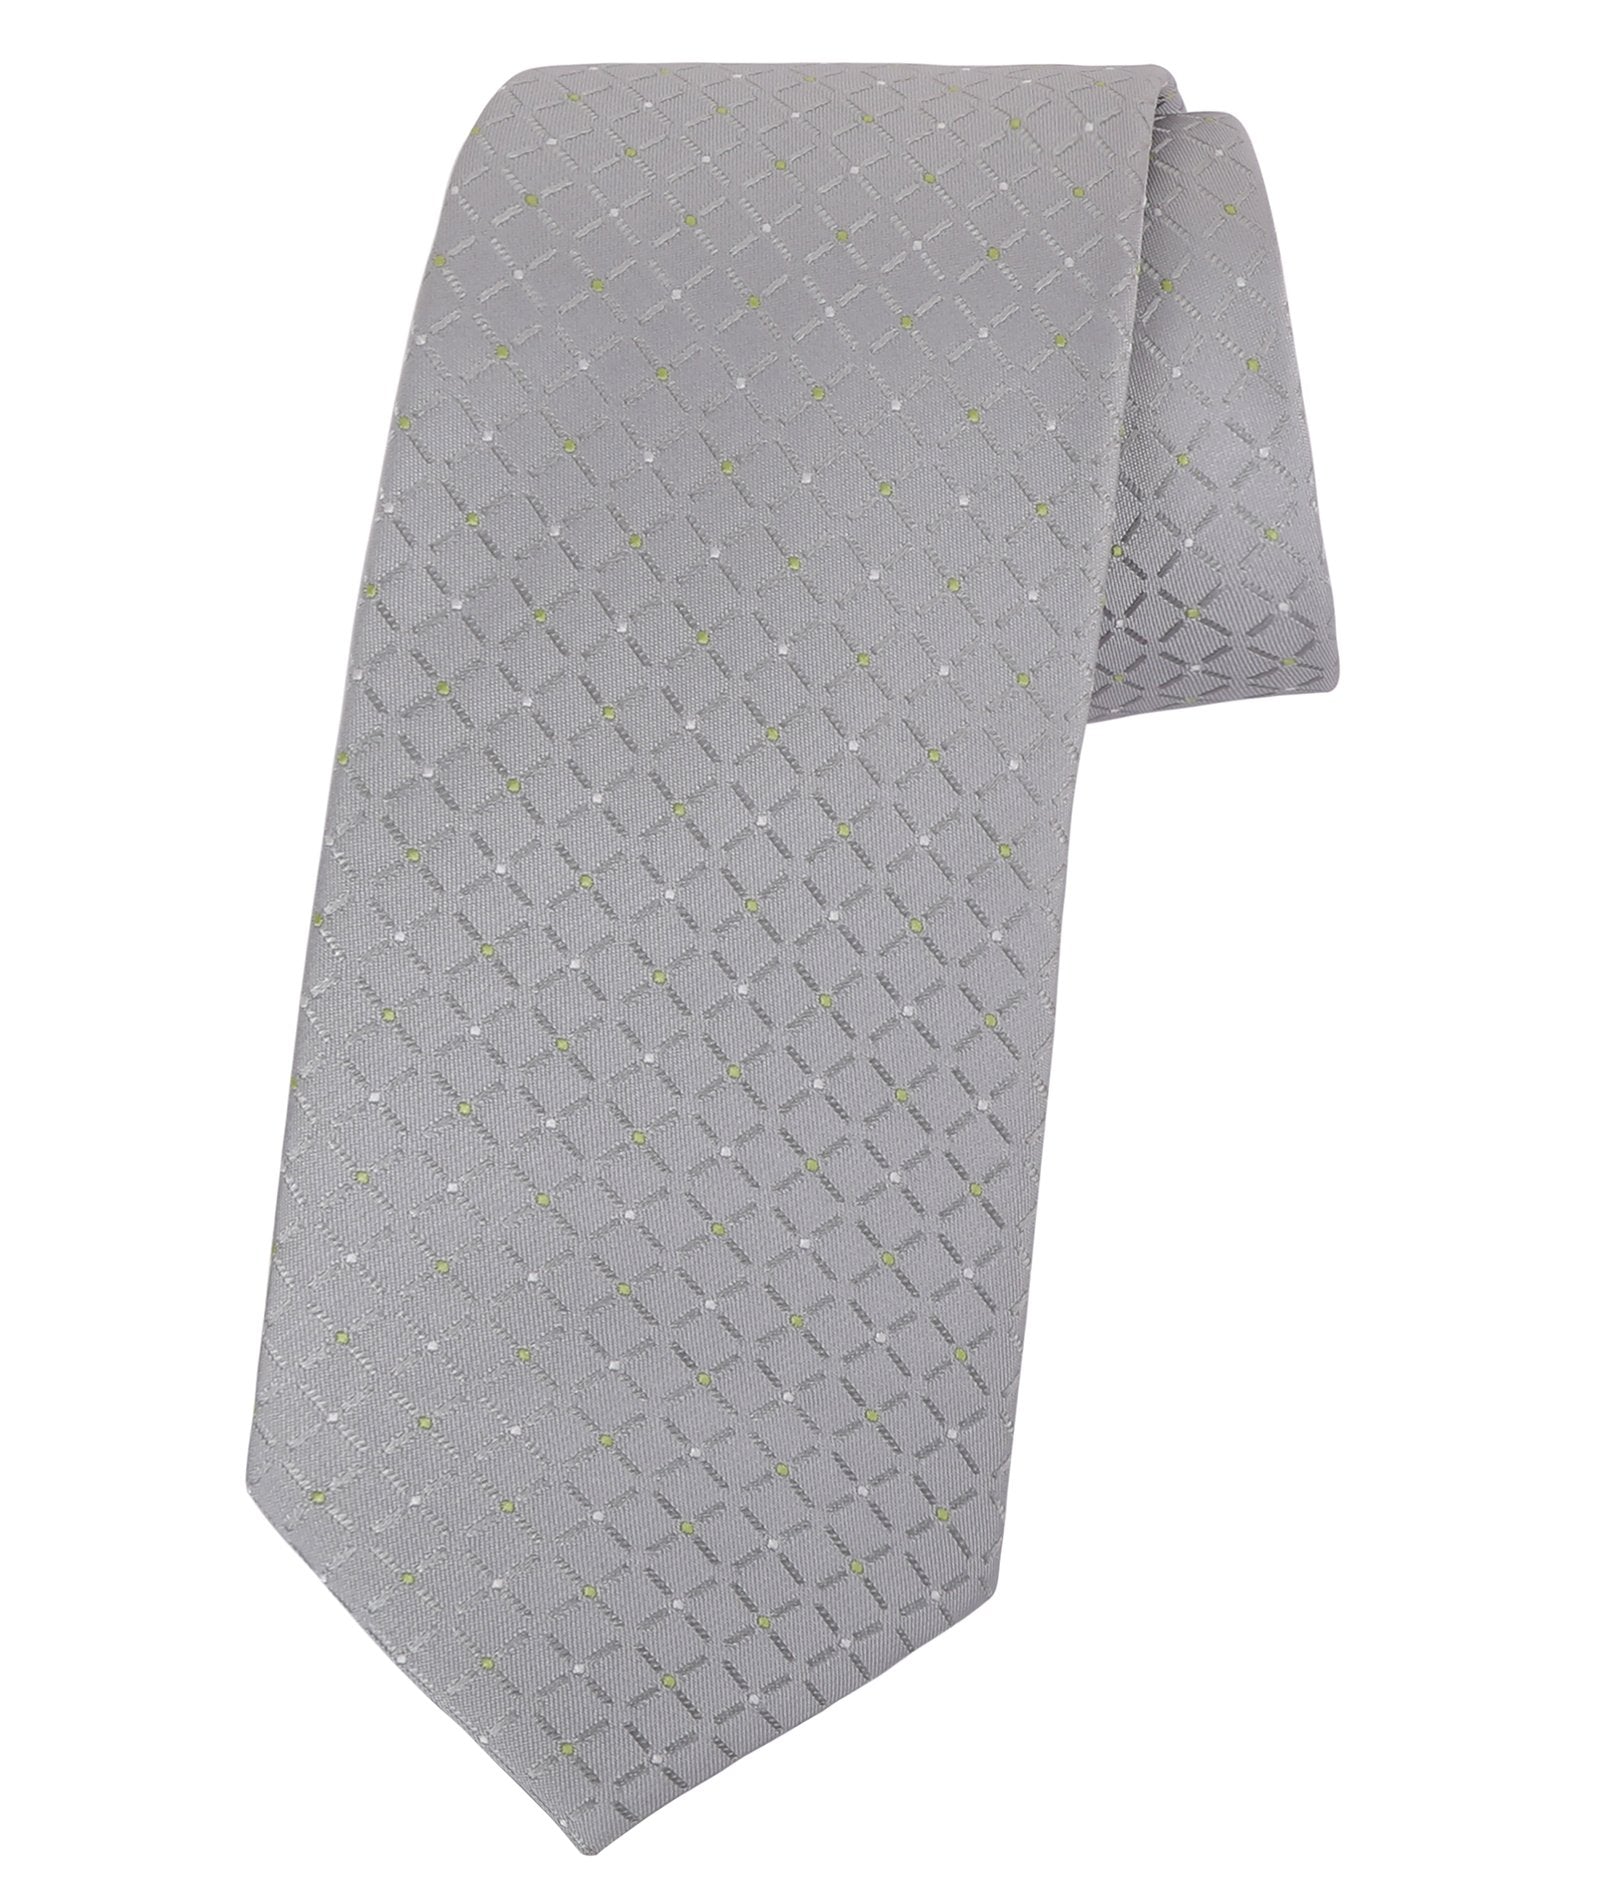 Grey with Green Dots Tie